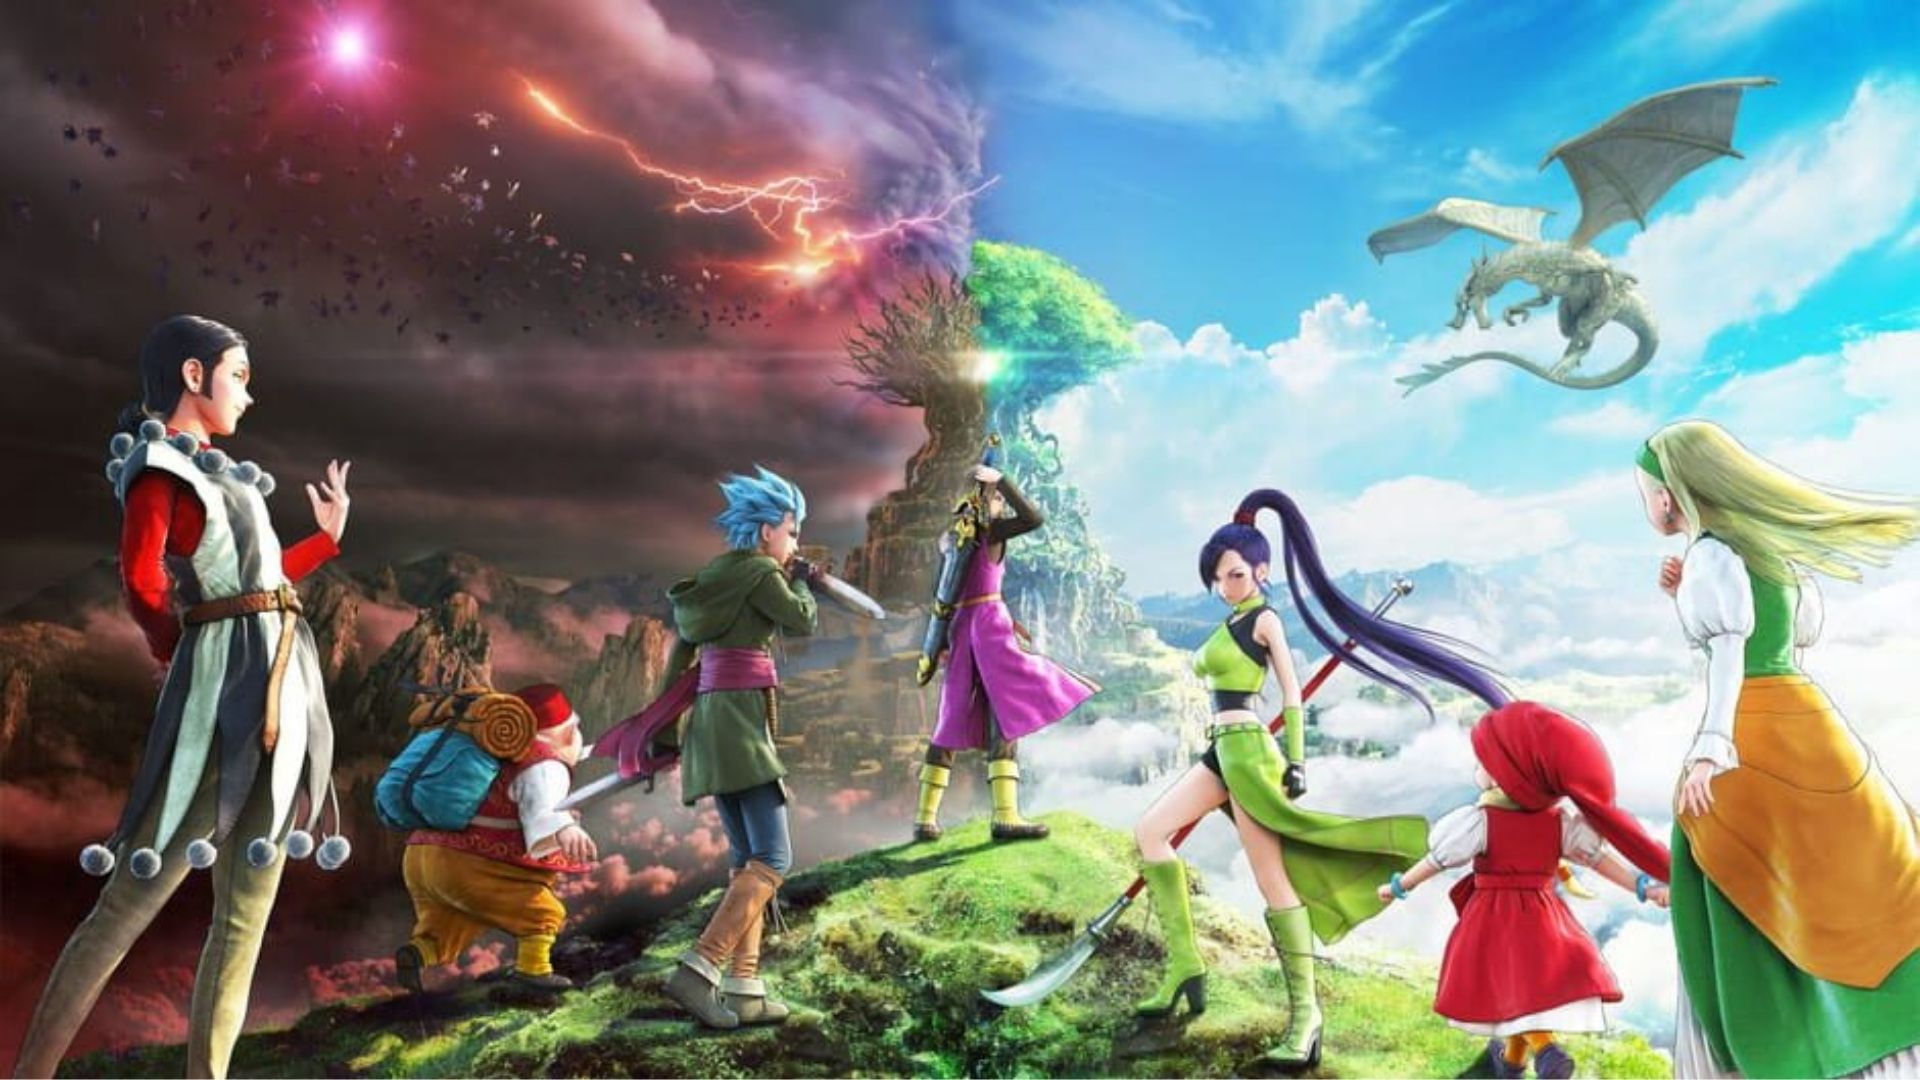 Art from Dragon Quest XI Echoes of an Elusive age, a game like Pokémon, featuring art of every character as they survey a landscape, half of it draped in fire, the other half with a dragon in clear skies.